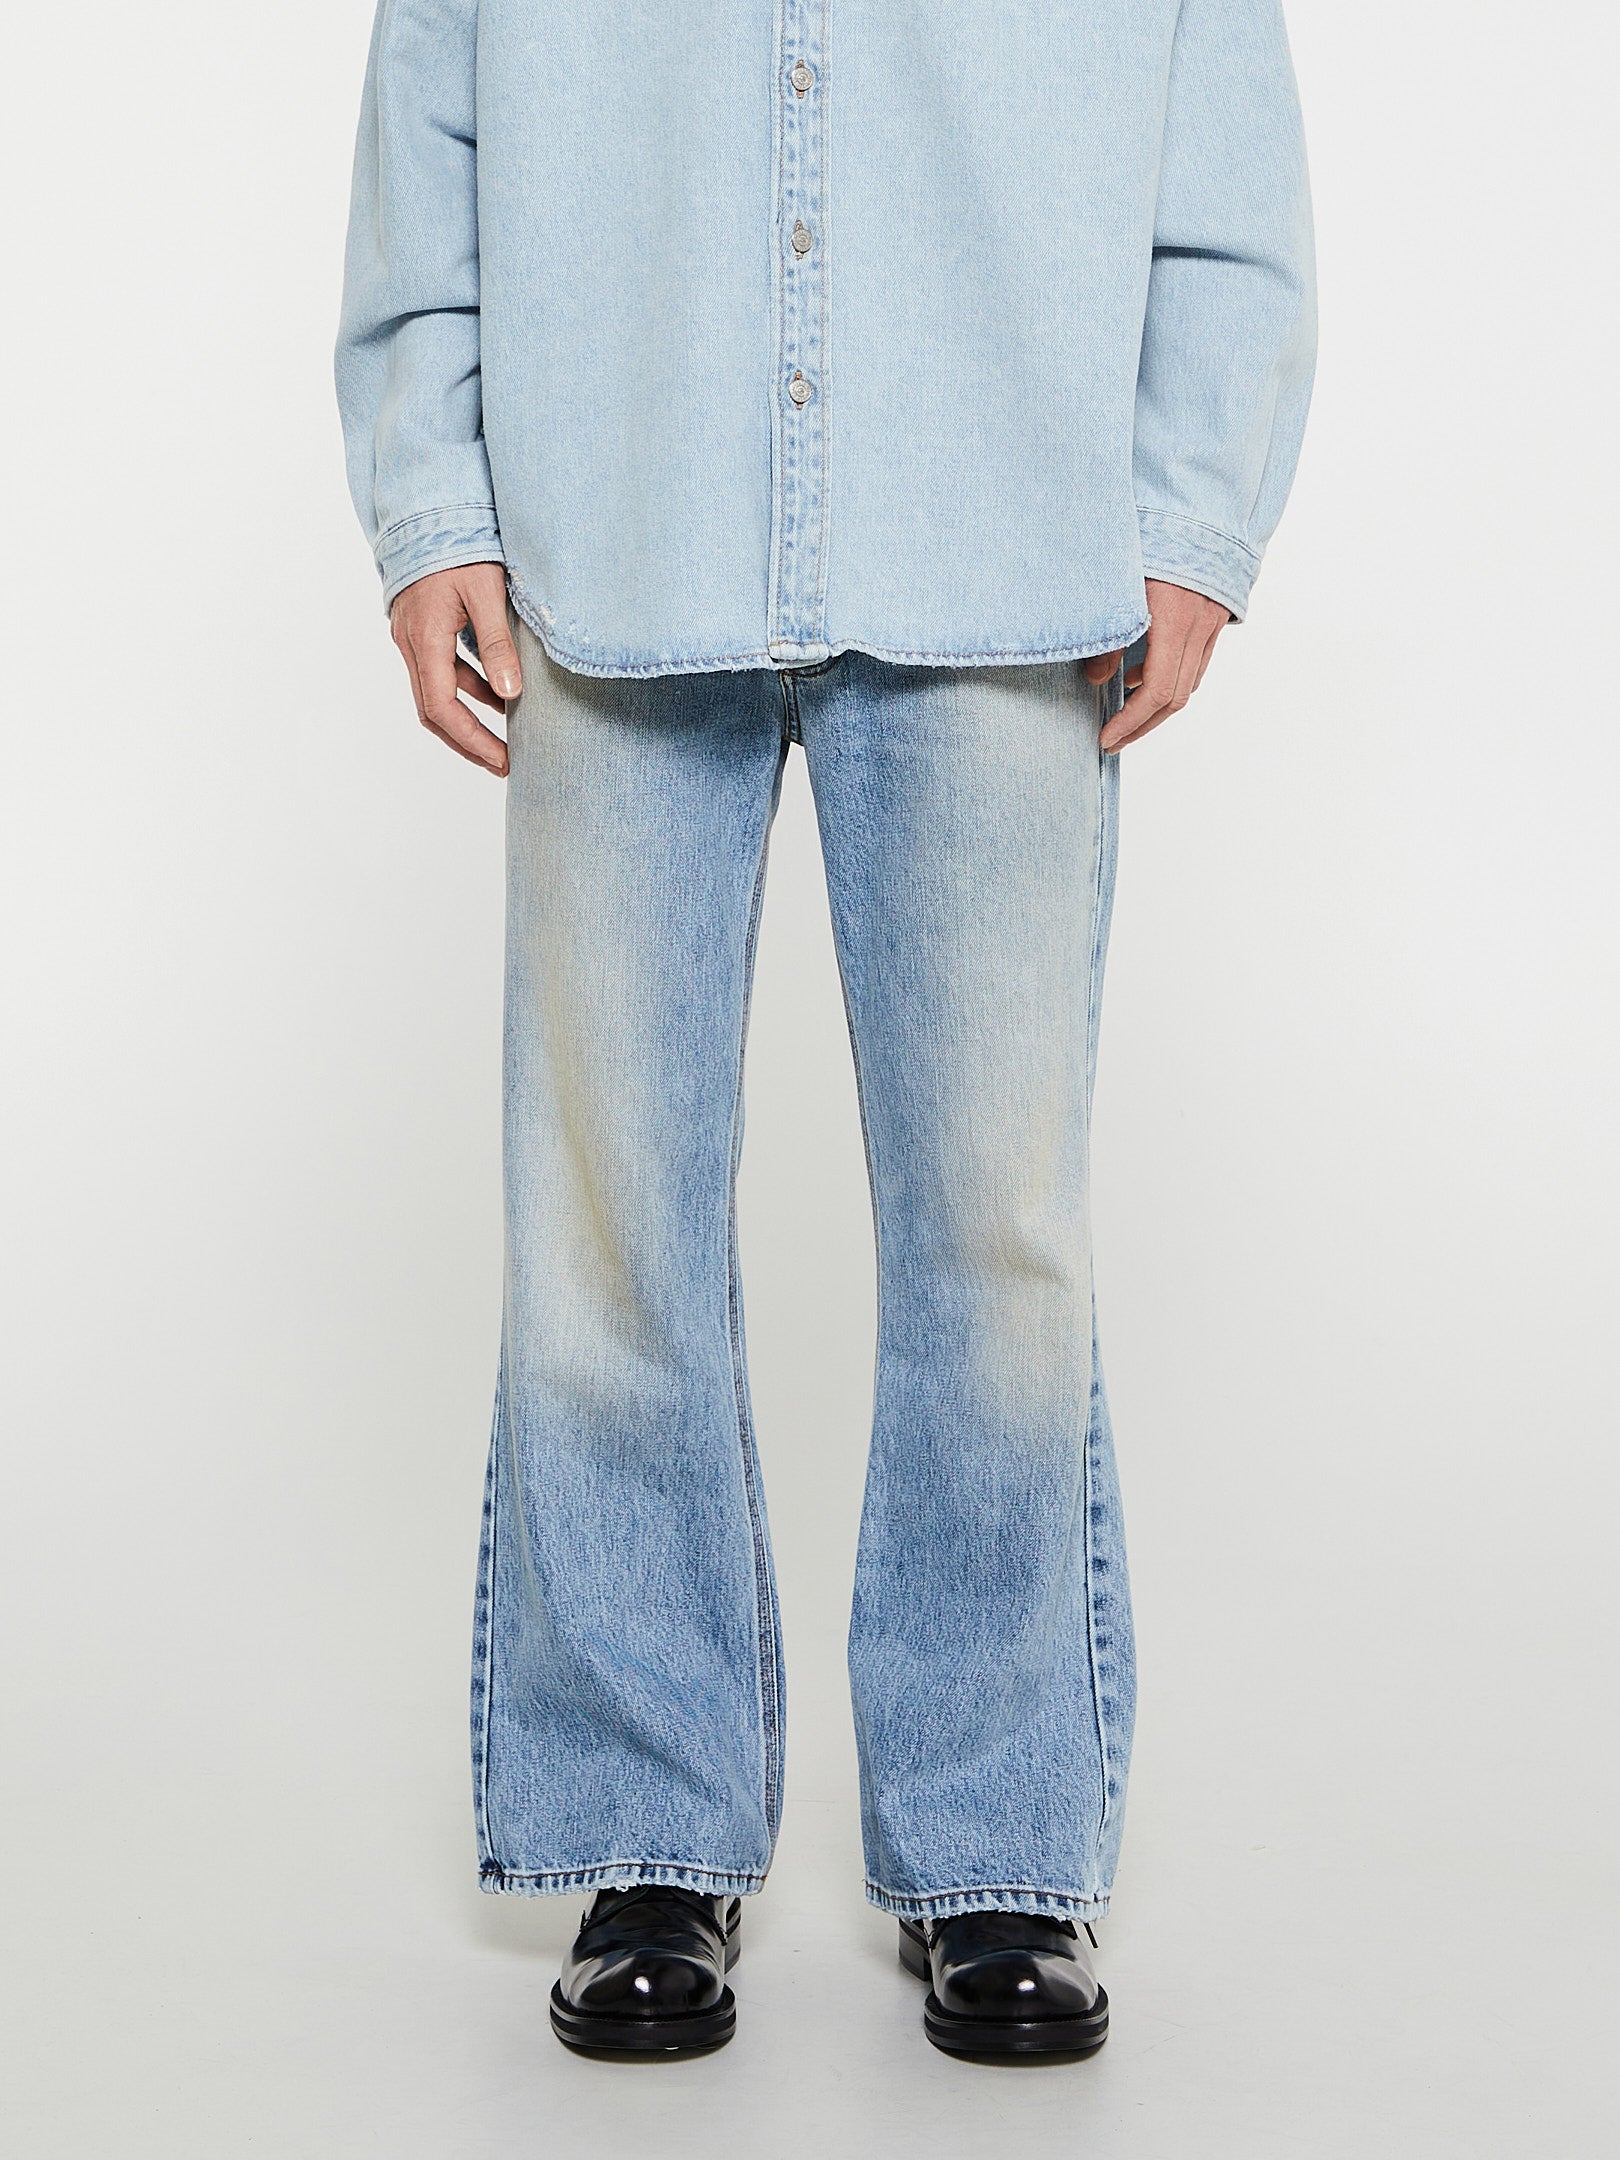 ERL - Patchwork Stars Jeans in Light Blue